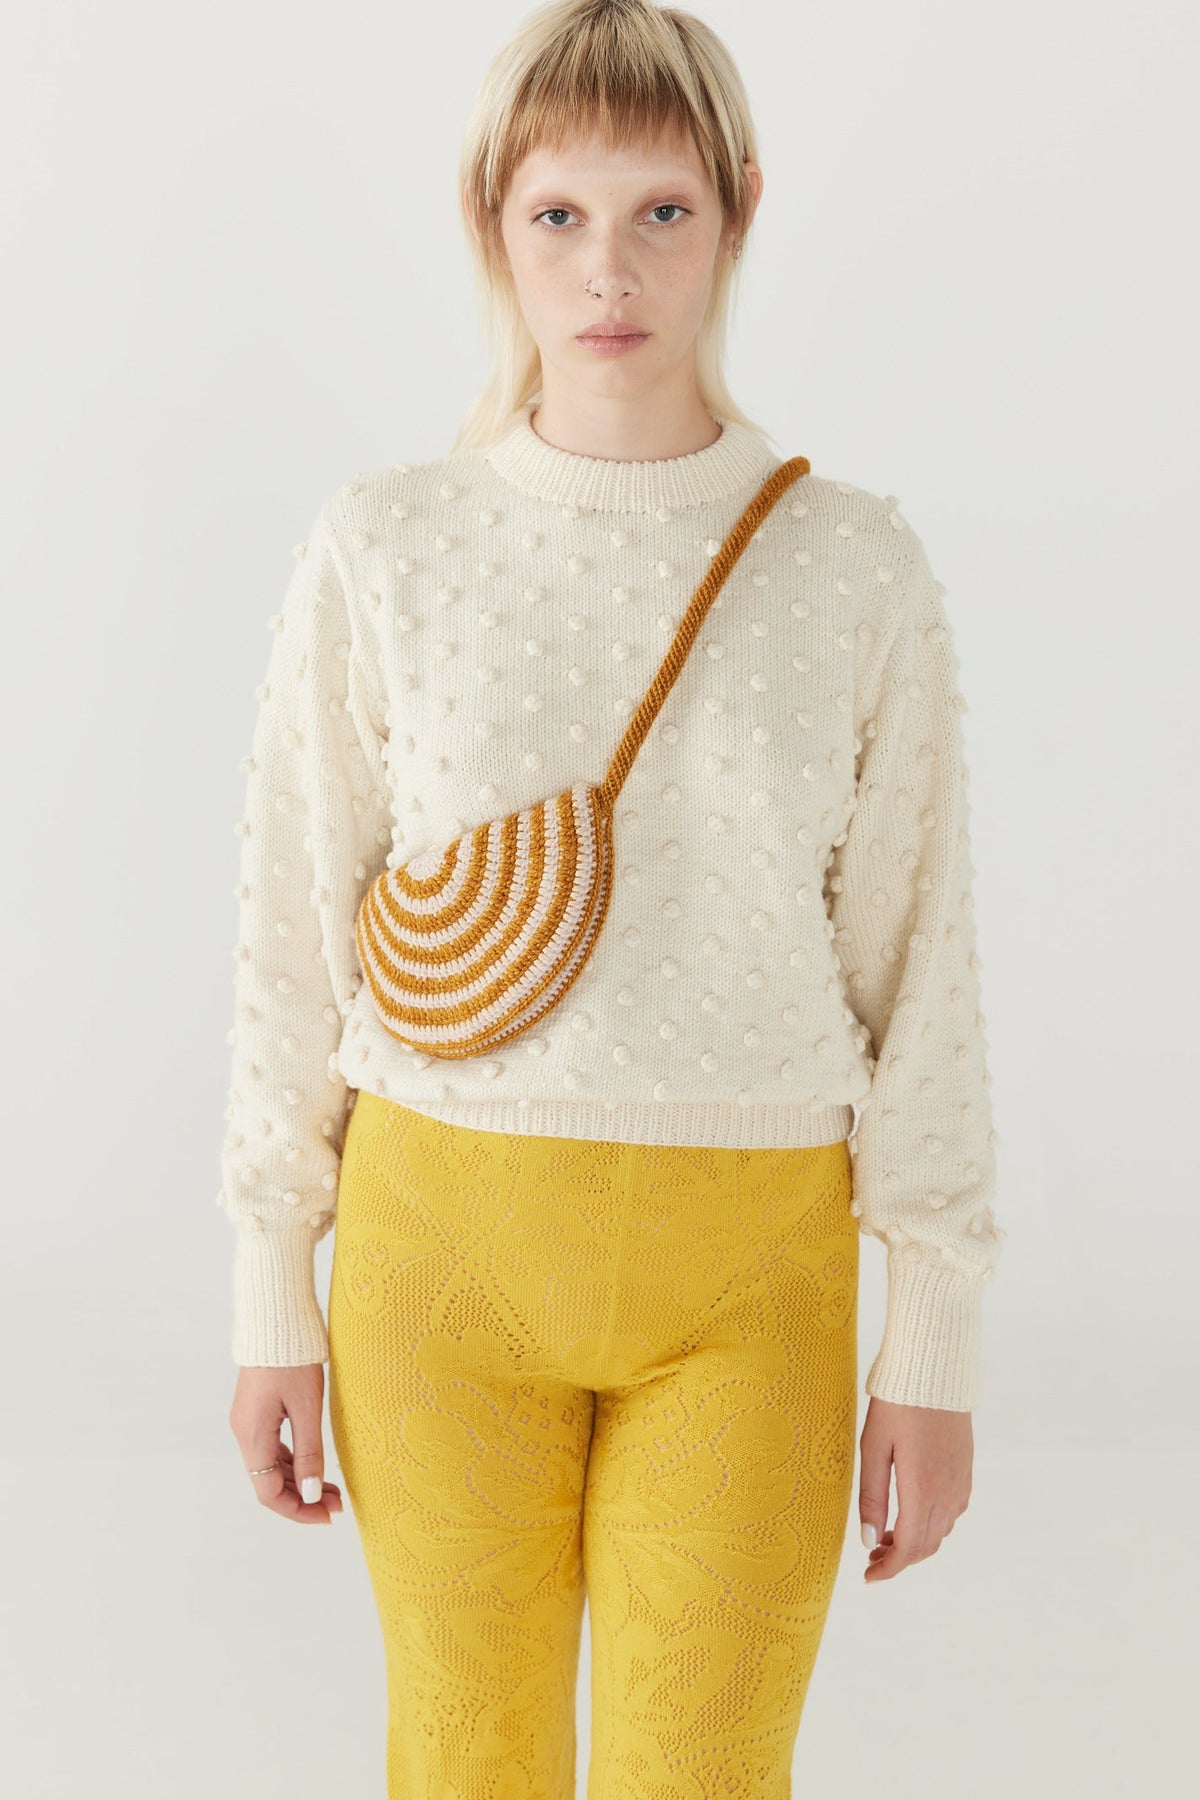 Adult Popcorn Crew Sweater - Winter Cream+Model is 5&#39;7&quot; | 34&quot; Bust | 26.5&quot; Waist | 36.25&quot; Hips | size 4, wearing a size Small